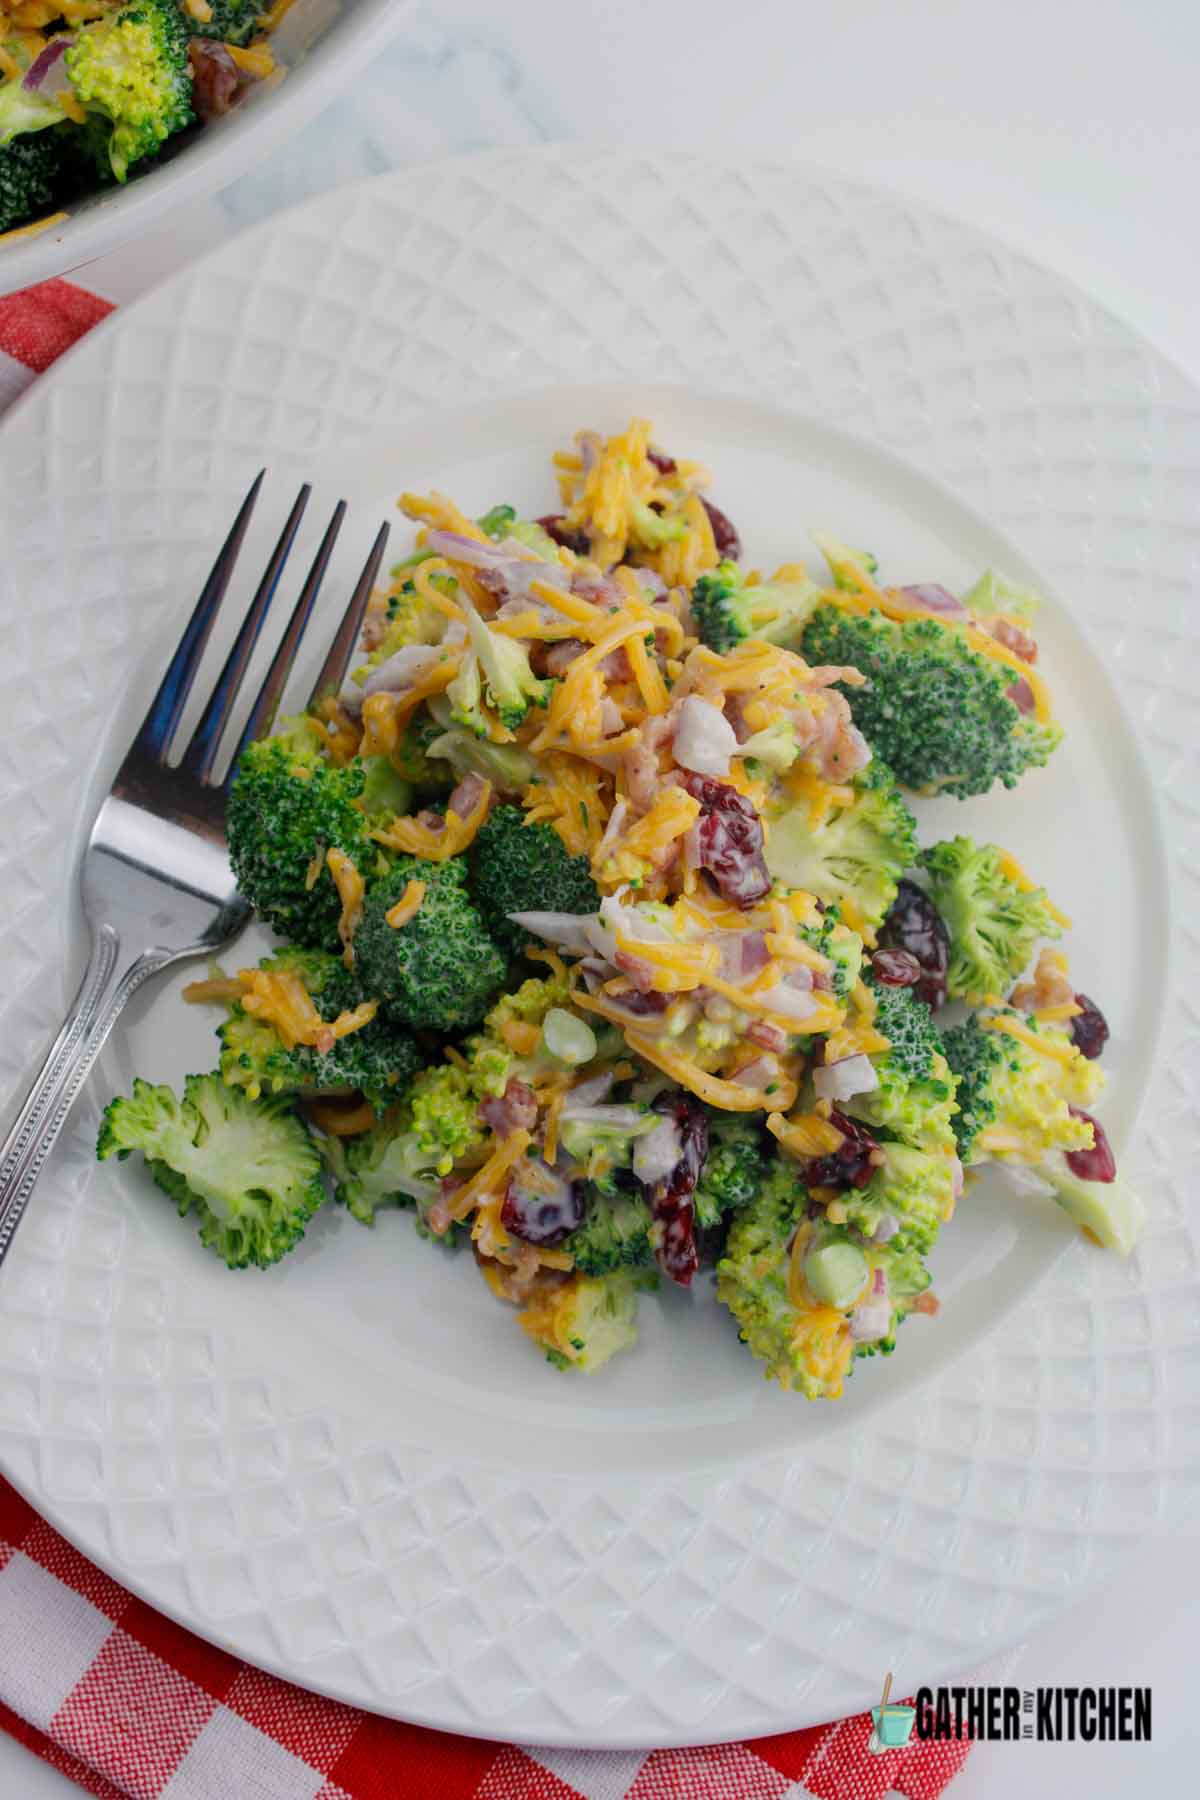 Top down view of broccoli salad on a plate.